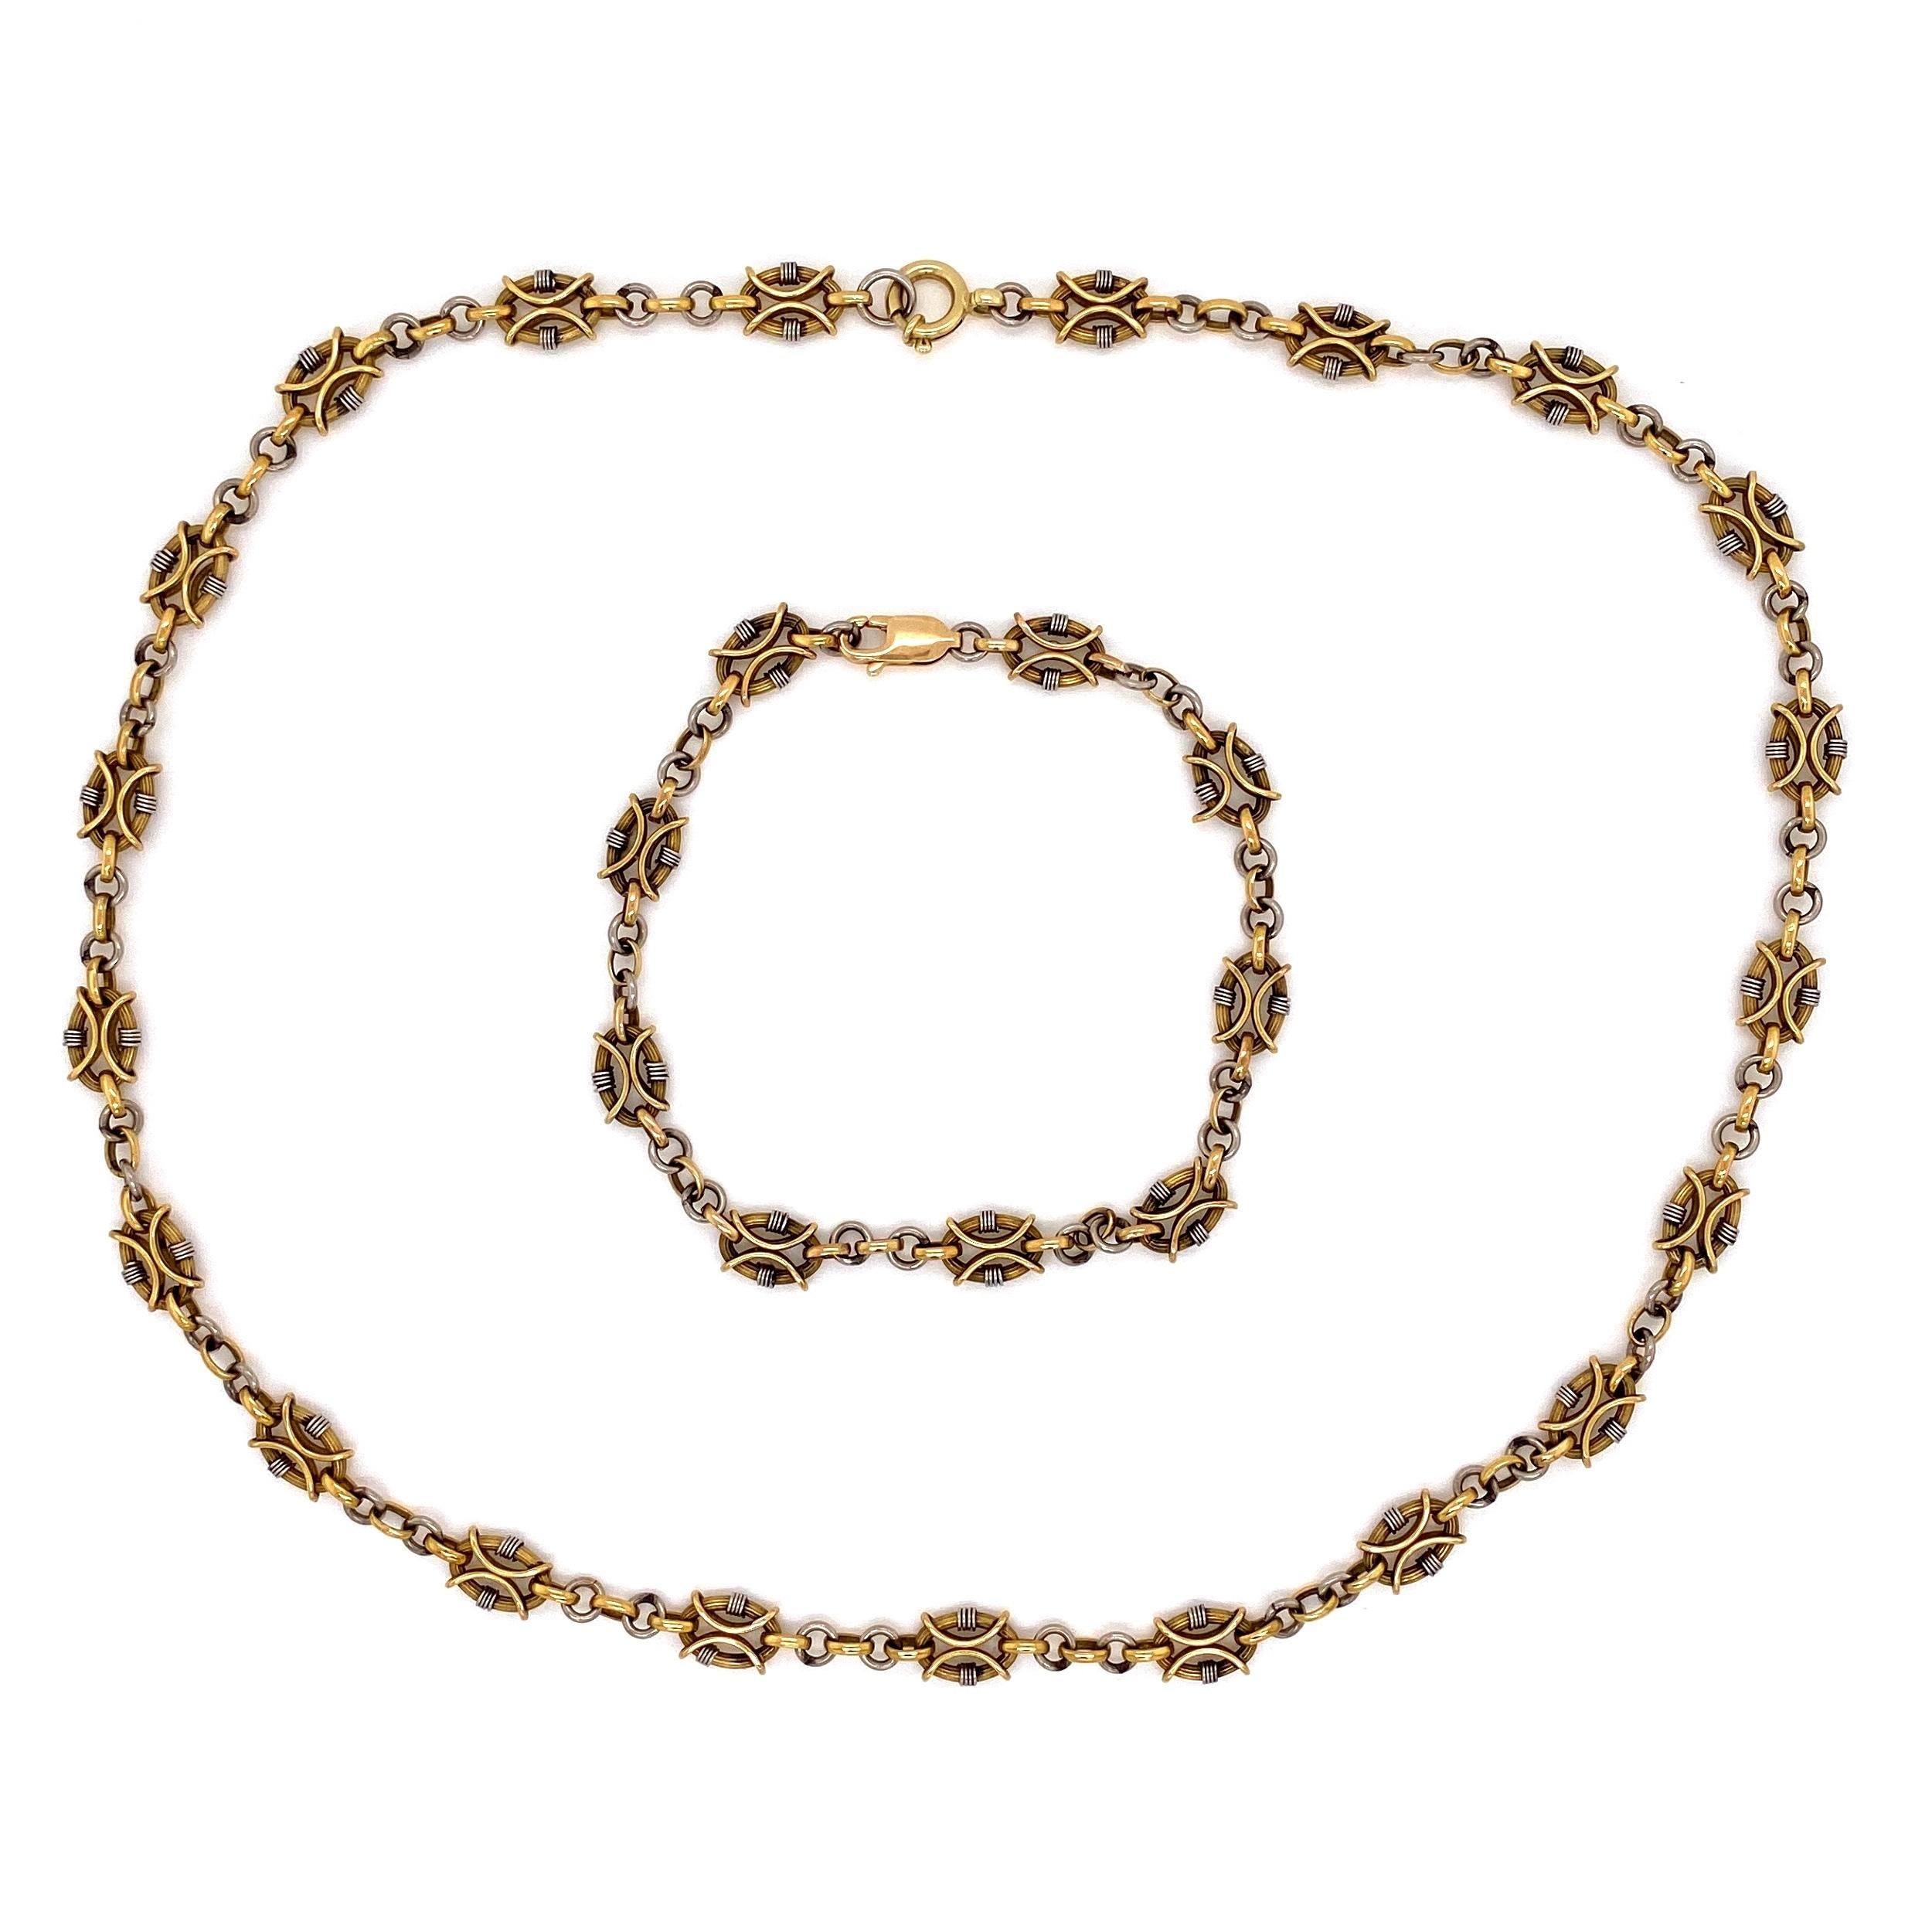 Classic and Stylish Necklace and Bracelet boosting Beautiful fancy chain link style designs. Handmade set is in Platinum and 18 Karat yellow Gold. Length of necklace: 23”; length of bracelet: 7”. This necklace and bracelet epitomize vintage charm